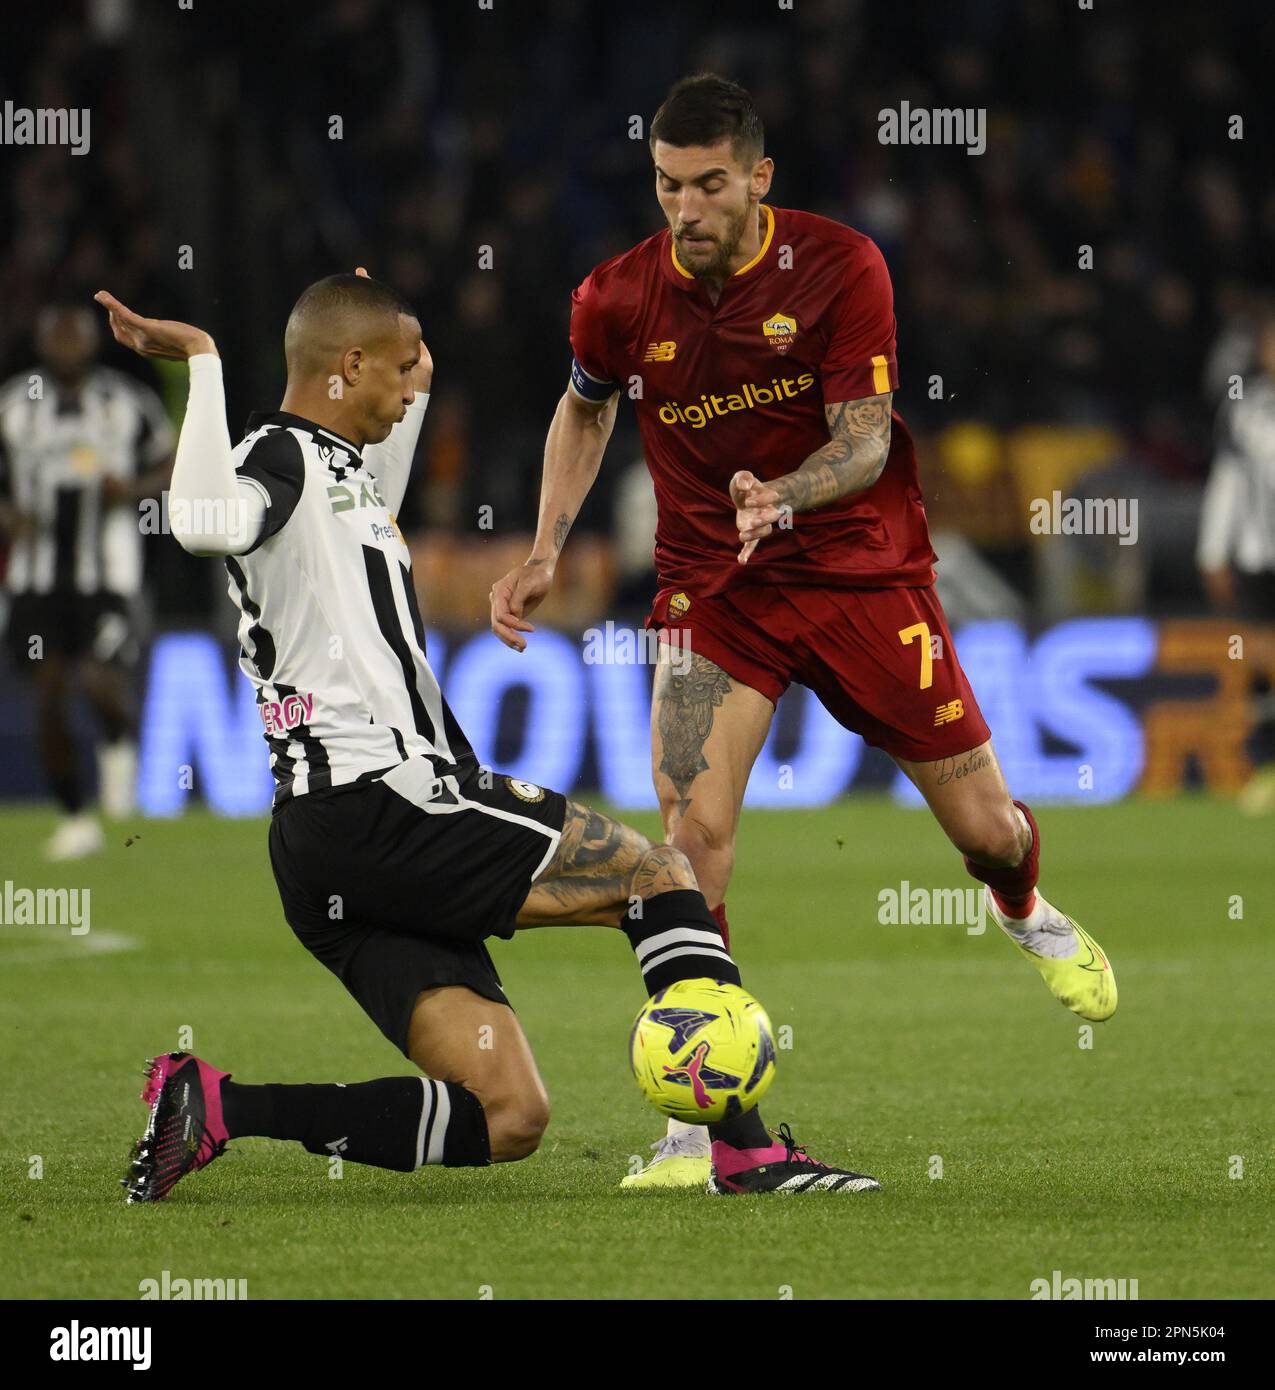 Rome, Italy. 16th Apr, 2023. Roma's Lorenzo Pellegrini (R) vies with Udinese's Rodrigo Becao during a Serie A football match between Roma and Udinese in Rome, Italy, on April 16, 2023. Credit: Alberto Lingria/Xinhua/Alamy Live News Stock Photo